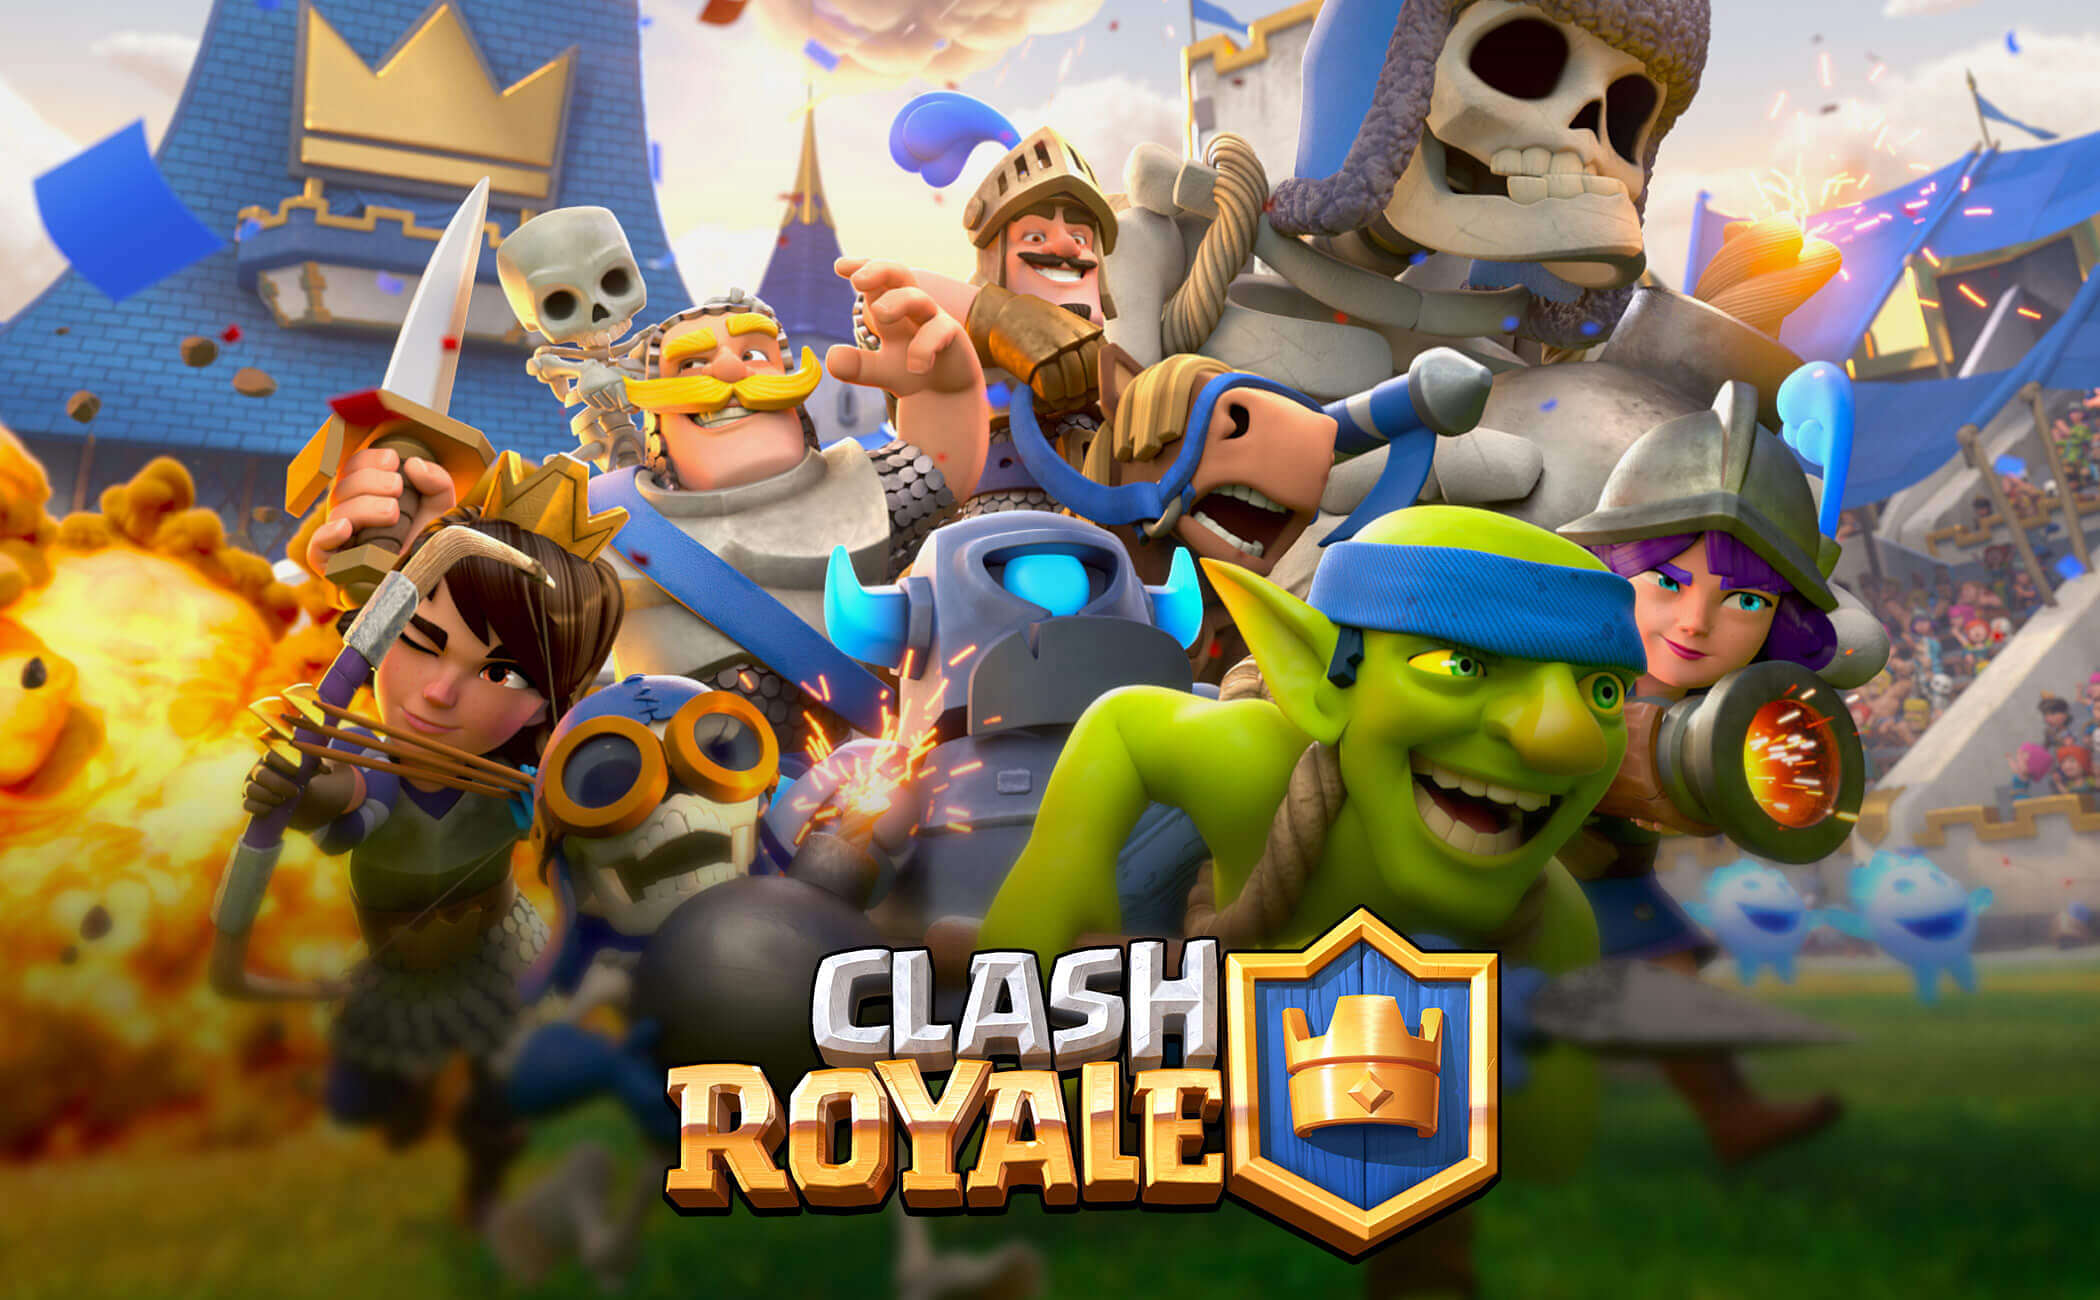 Jio Games Clash Royale Contest: Tips & Tricks, Rules, Format